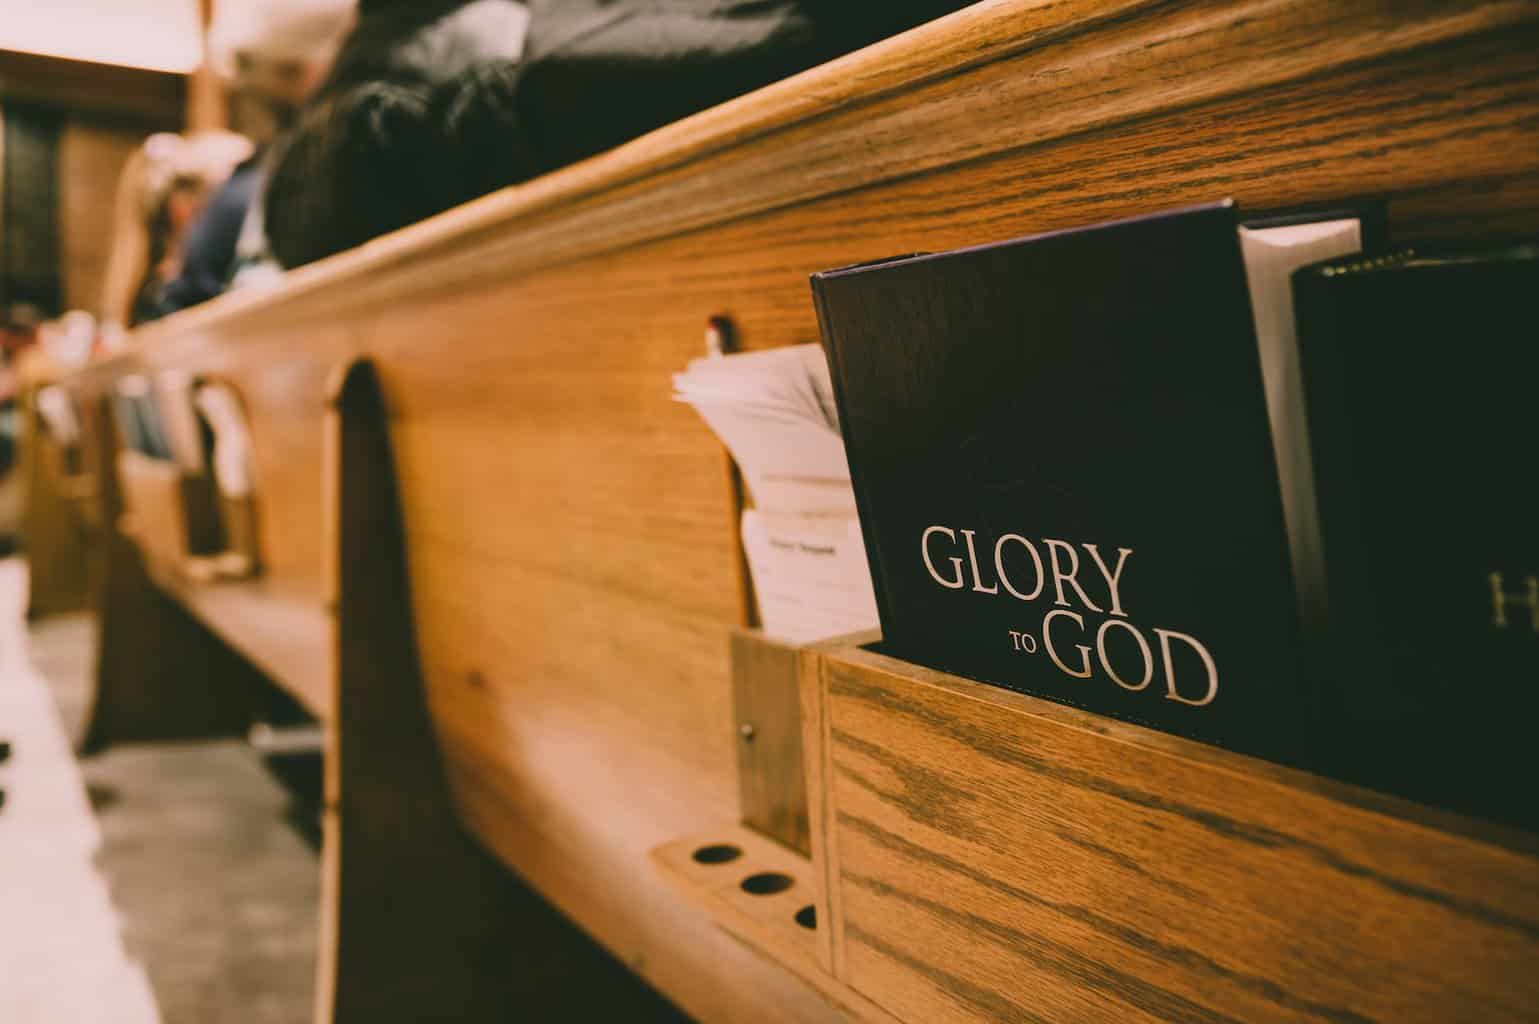 glory to god book - Ways Your Church Can Save Money Every Month